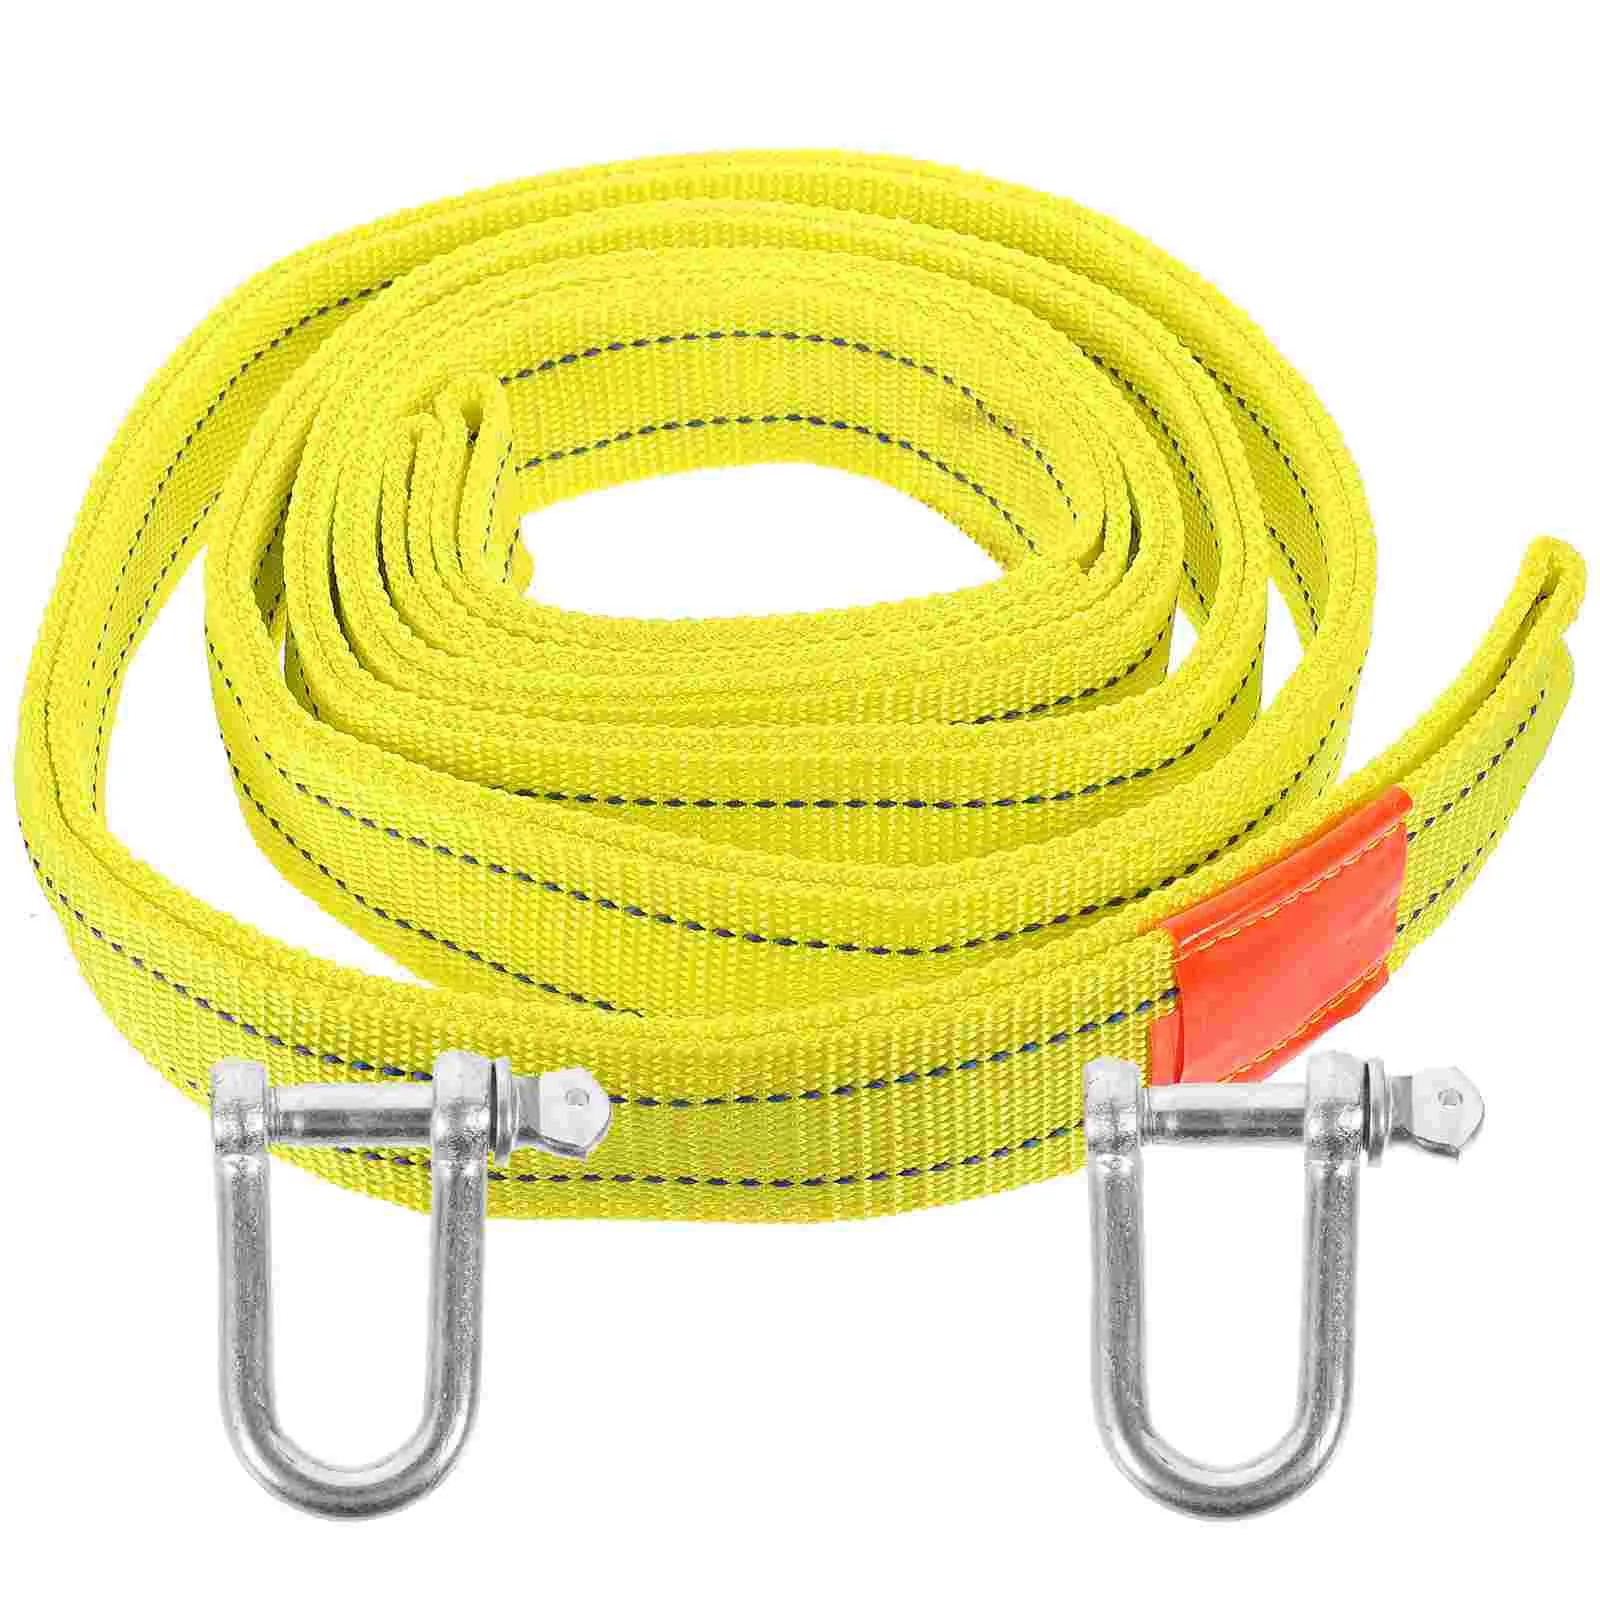 

5m 5 Ton Heavy Duty Tow Strap Car Trailer Towing Rope Strap Cable with Hooks Emergency Vehicle Tool Yellow Glass